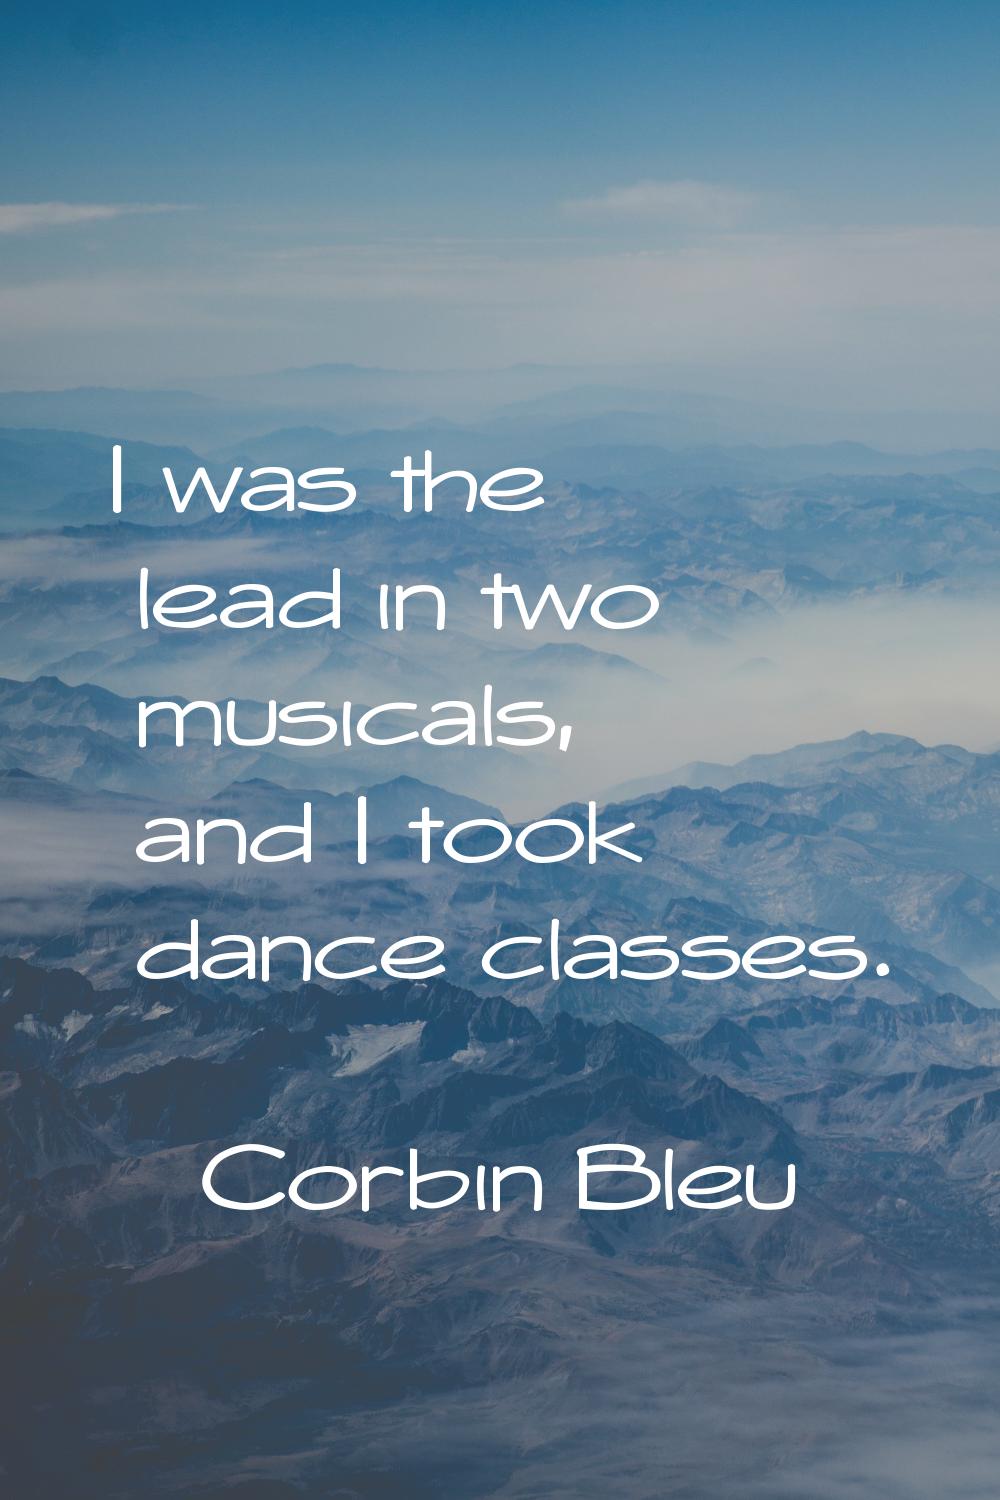 I was the lead in two musicals, and I took dance classes.